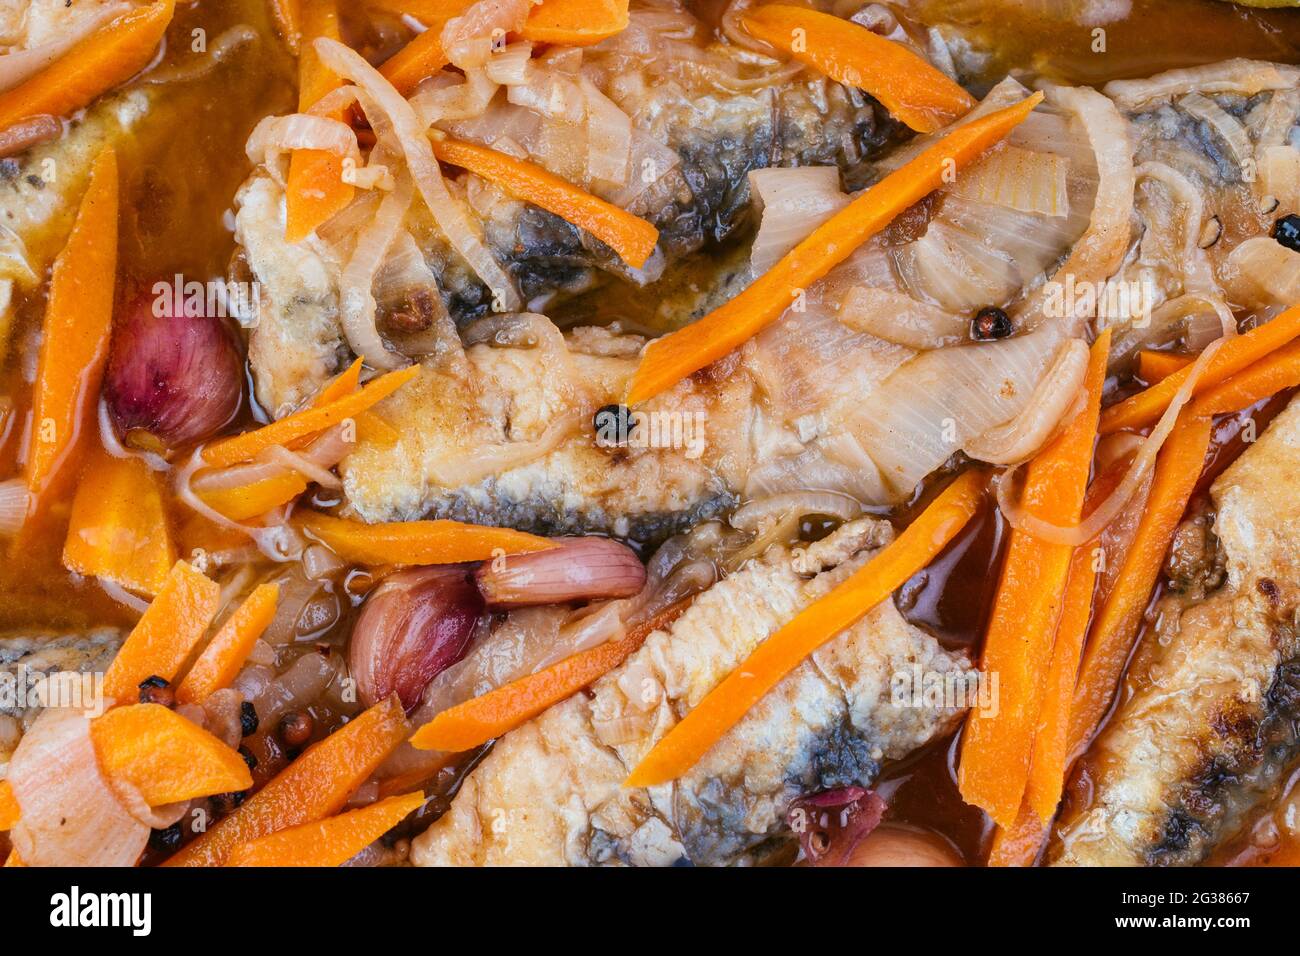 Typical Andalusian food. Sardines in escabeche - Pickled sardines. Escabeche is the name for a number of dishes in Spanish, consisting of marinated fi Stock Photo